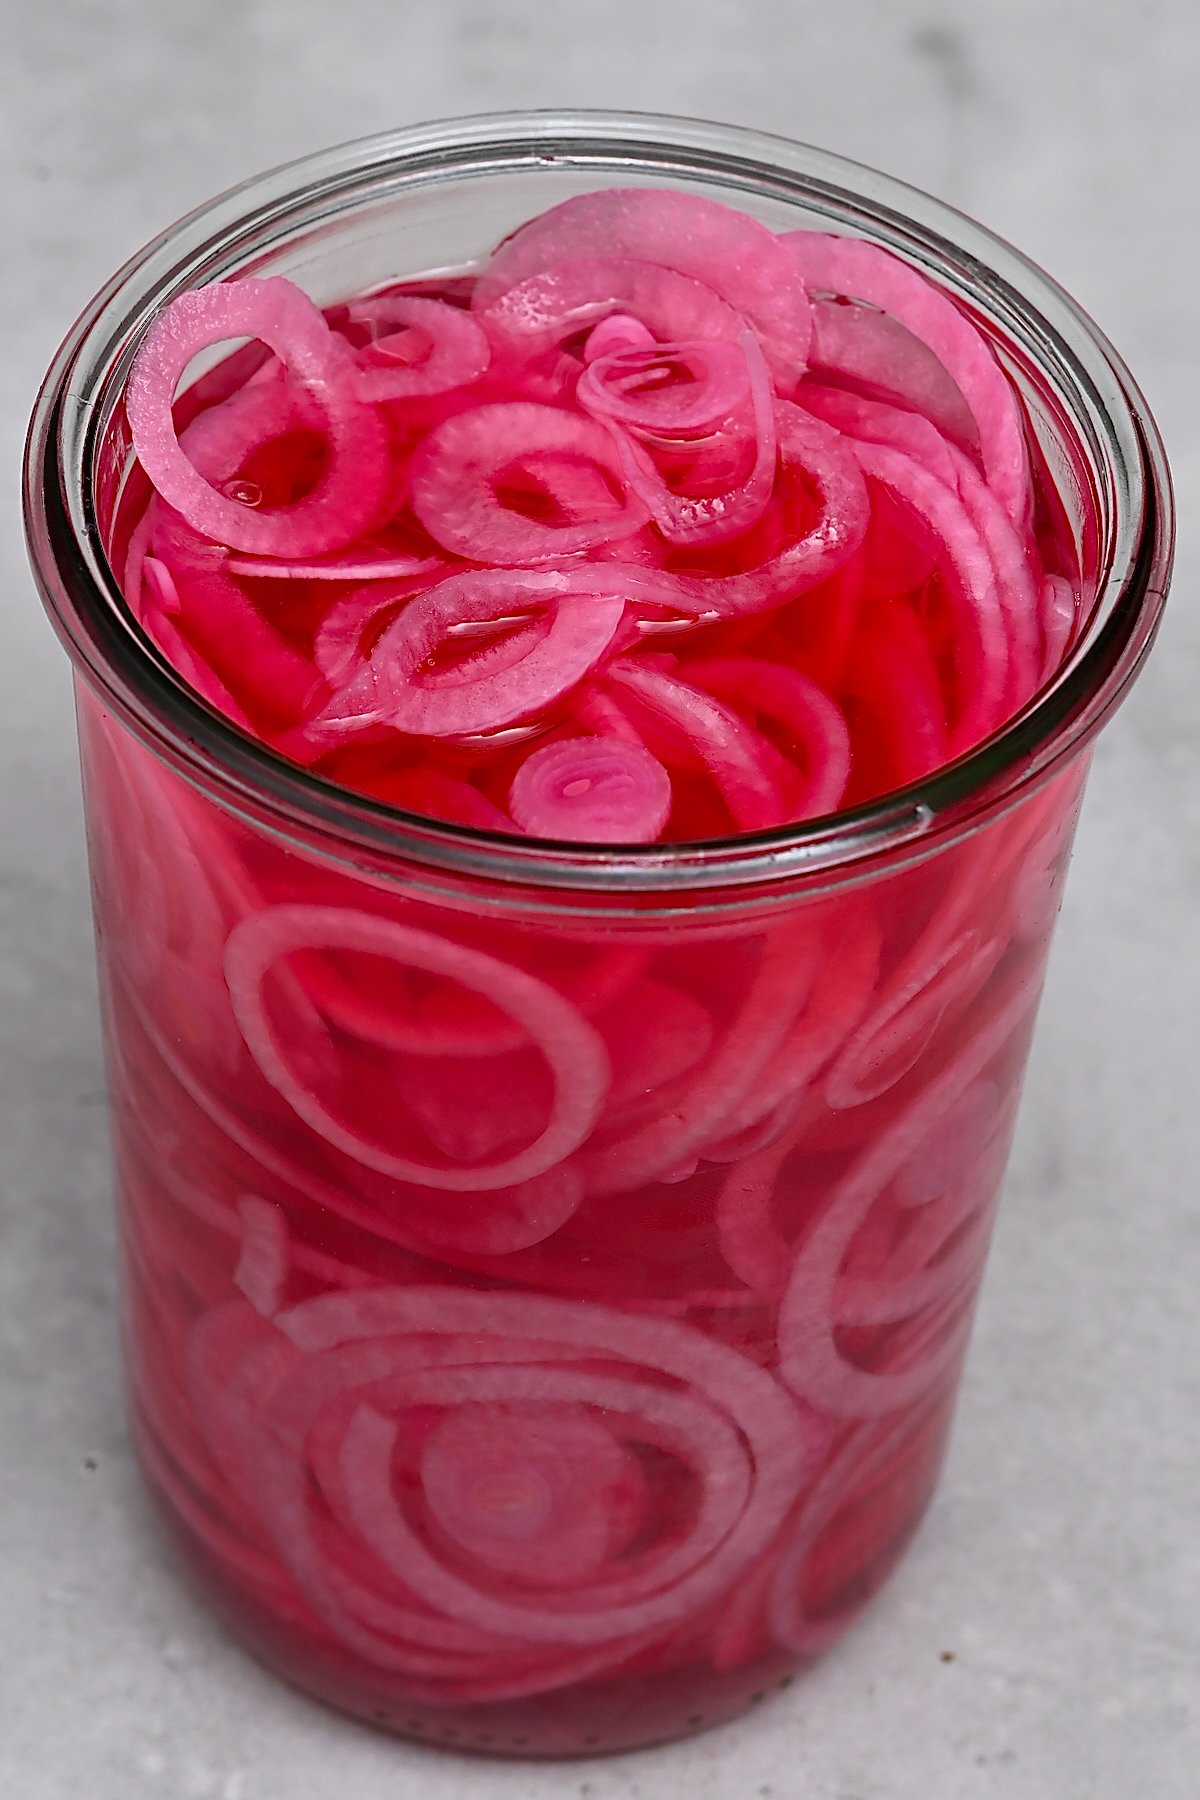 A jar with Homemade pickled red onions